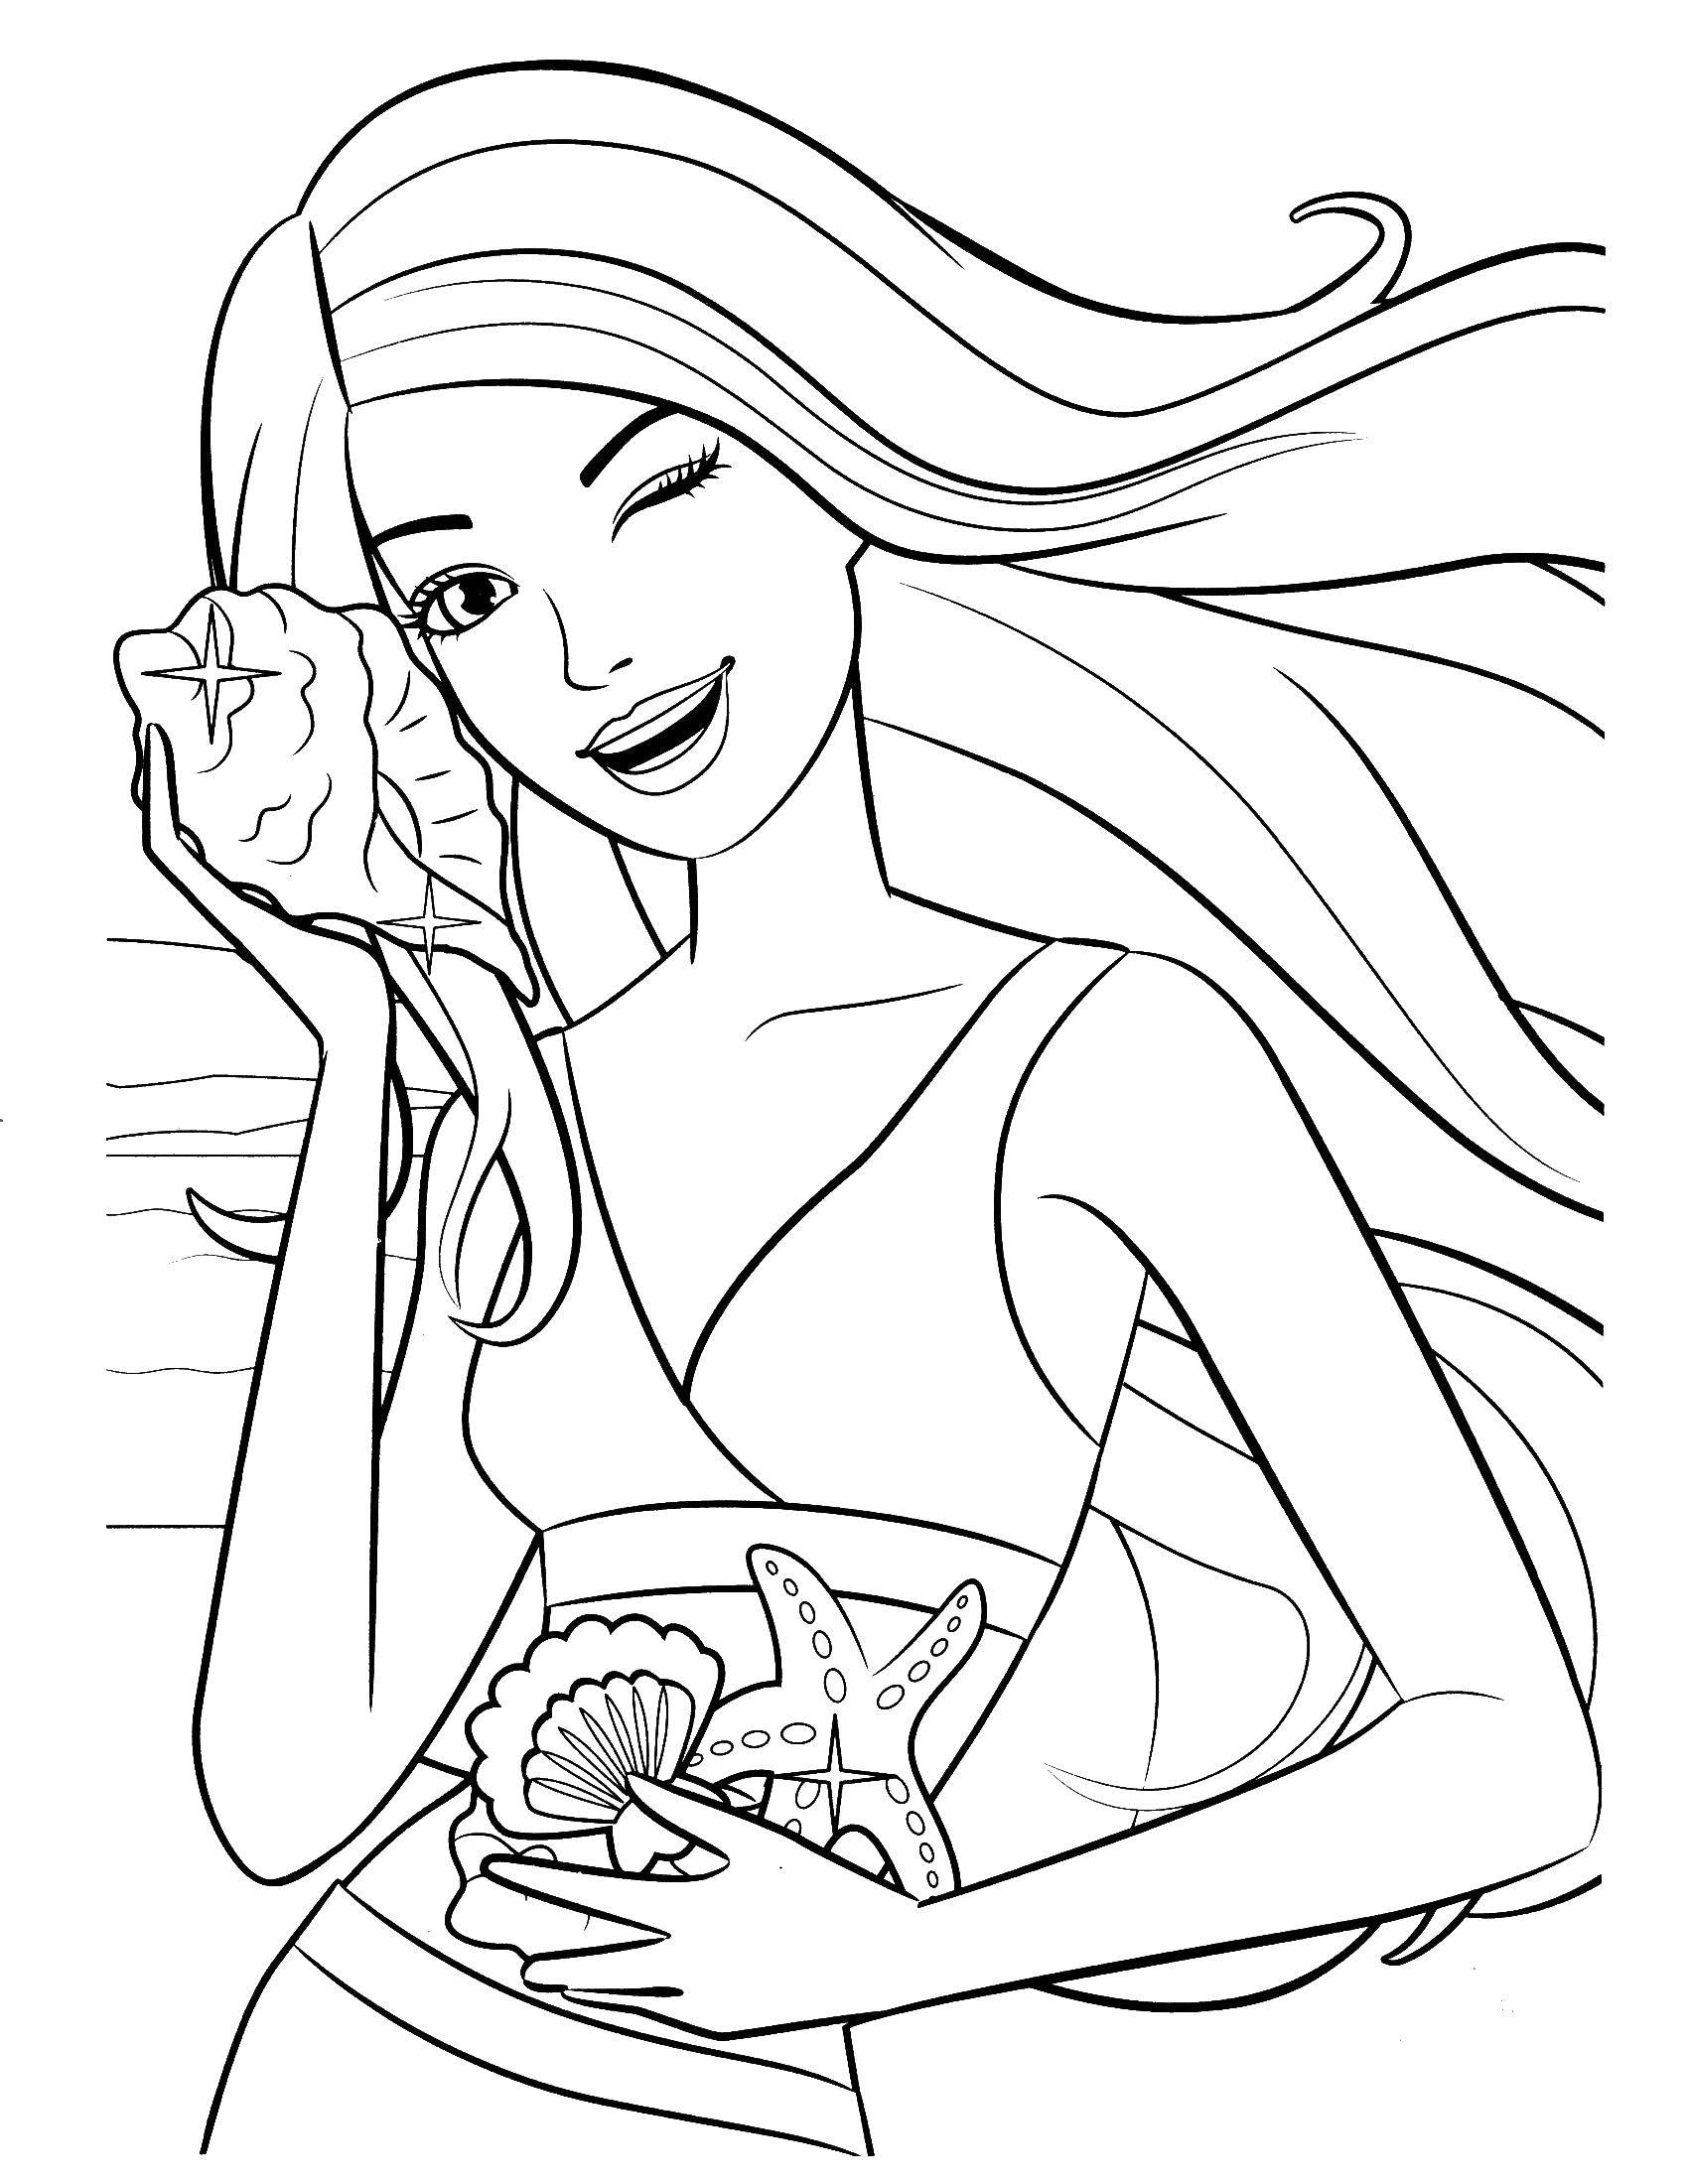 Coloring Barbie on the beach with seashells. Category Barbie . Tags:  Barbie , girl. doll.